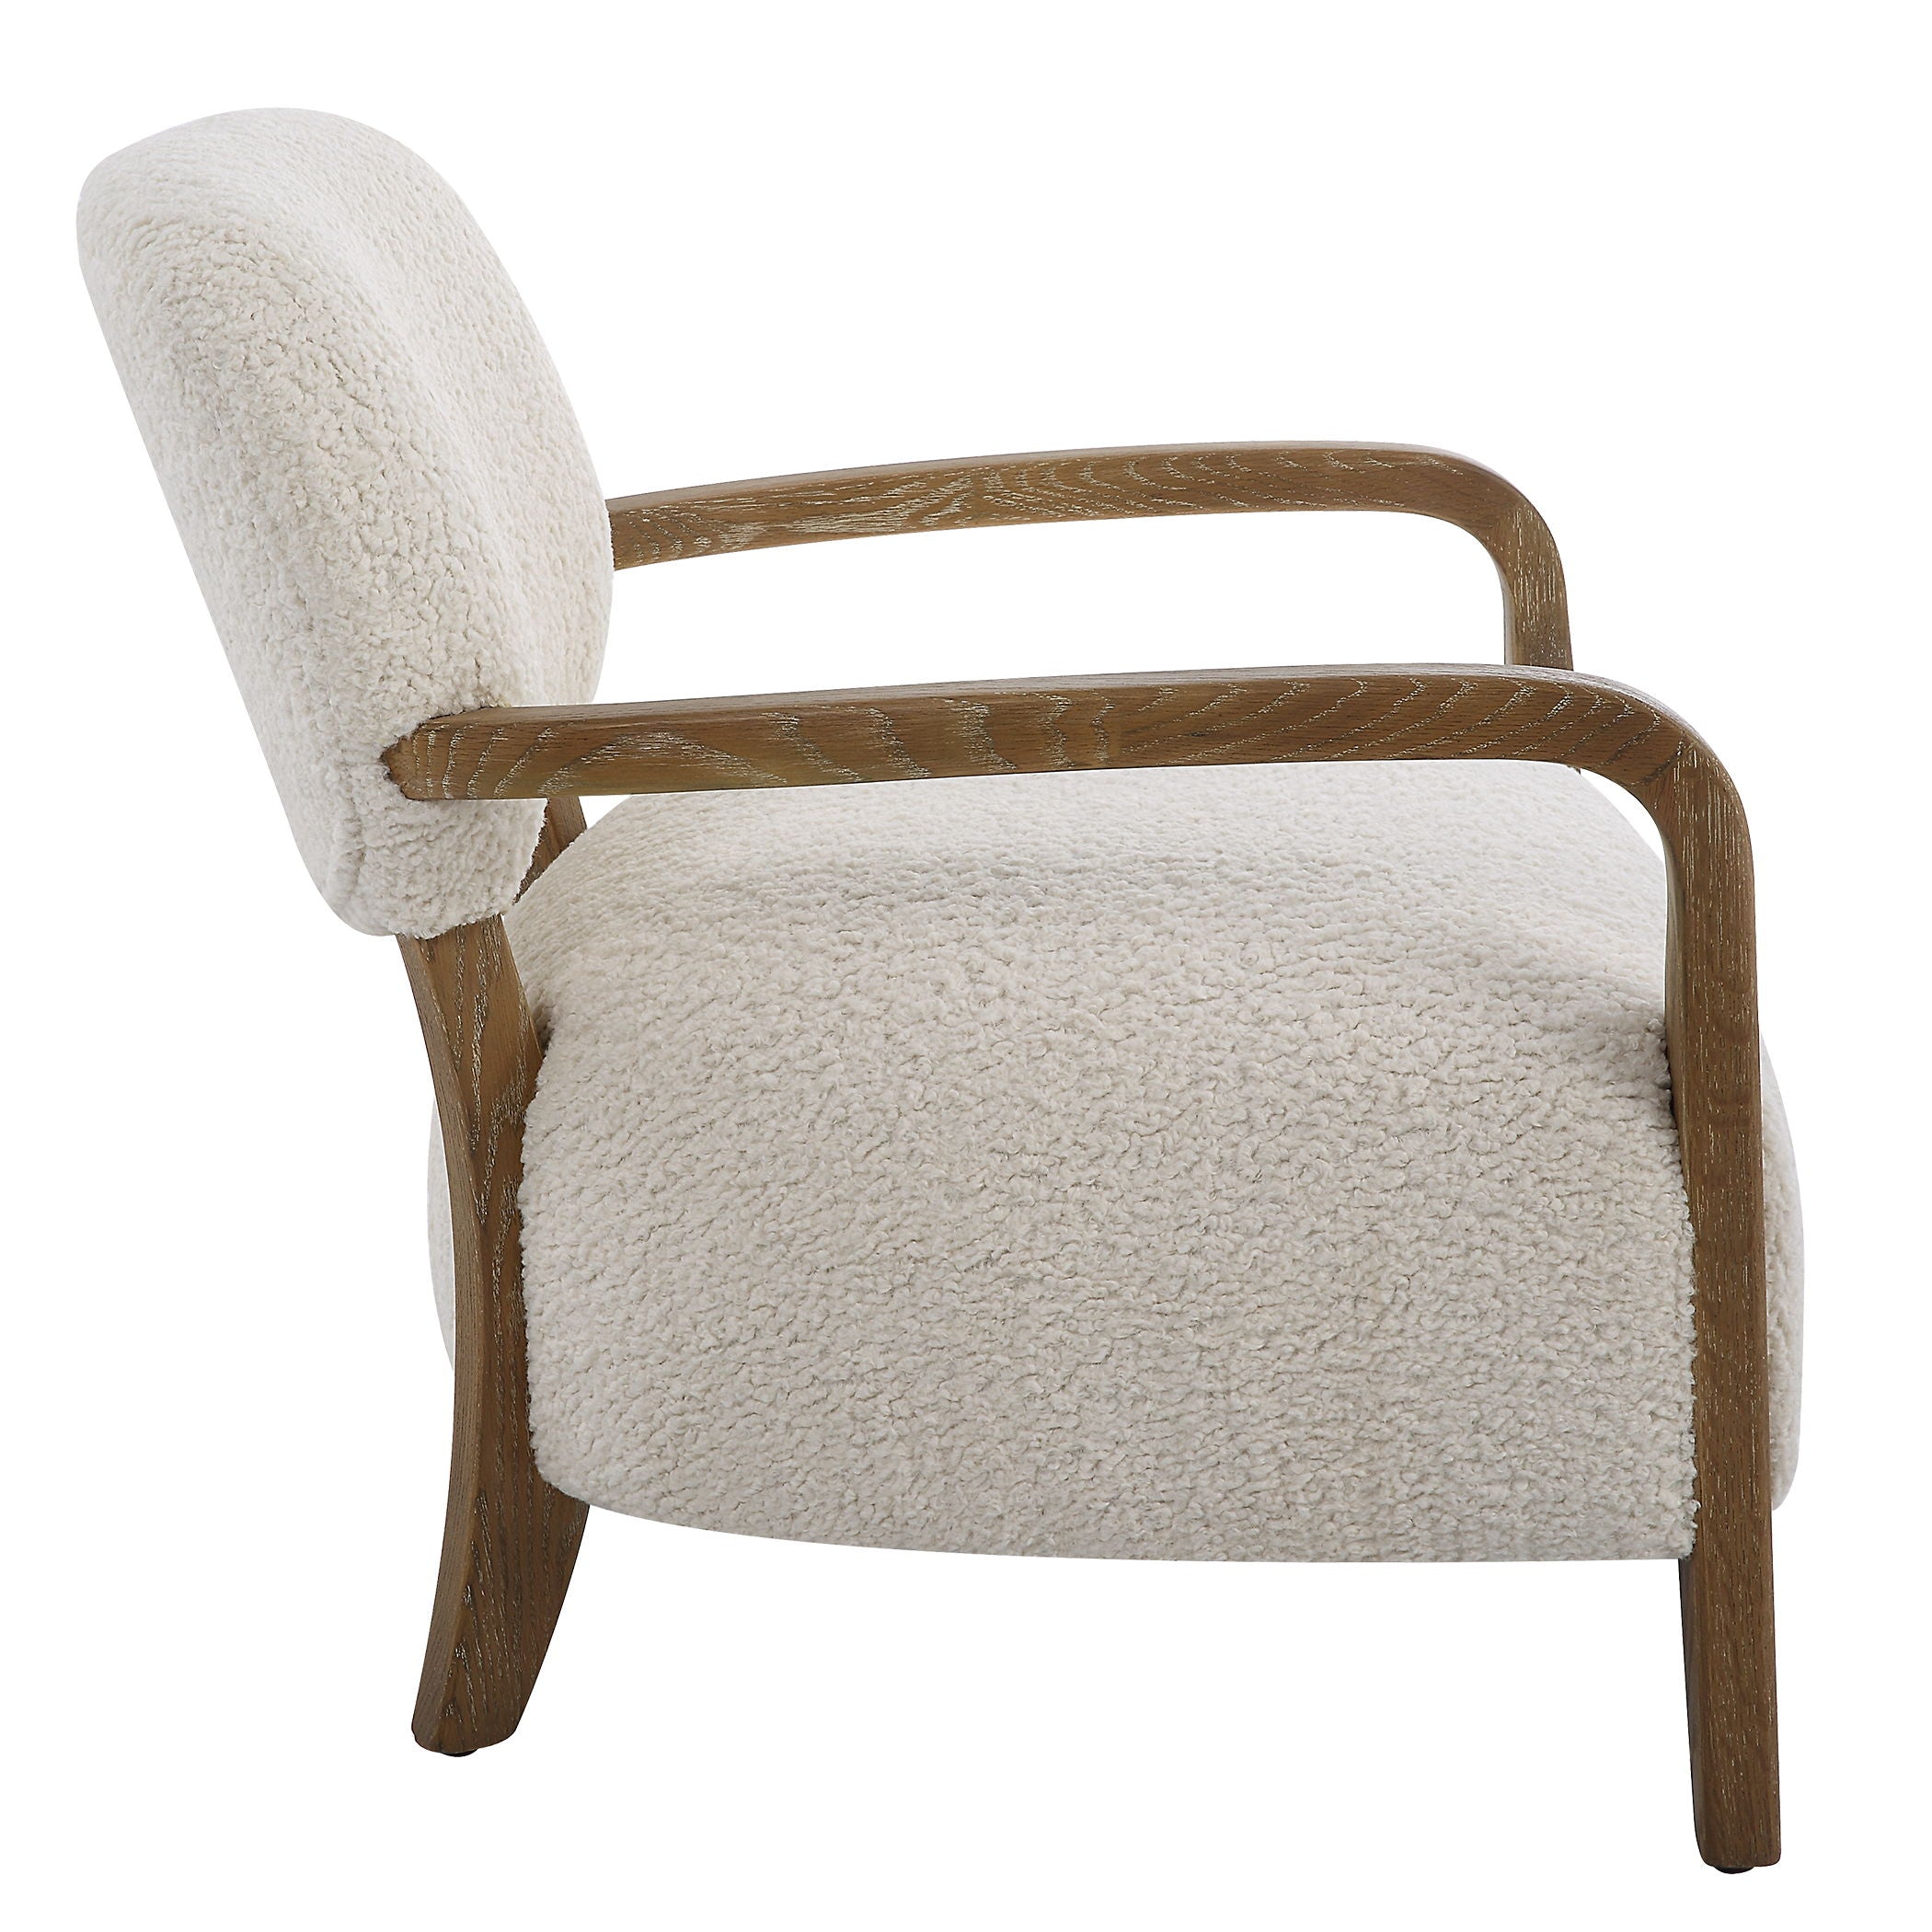 Telluride - Natural Shearling Accent Chair - Beige